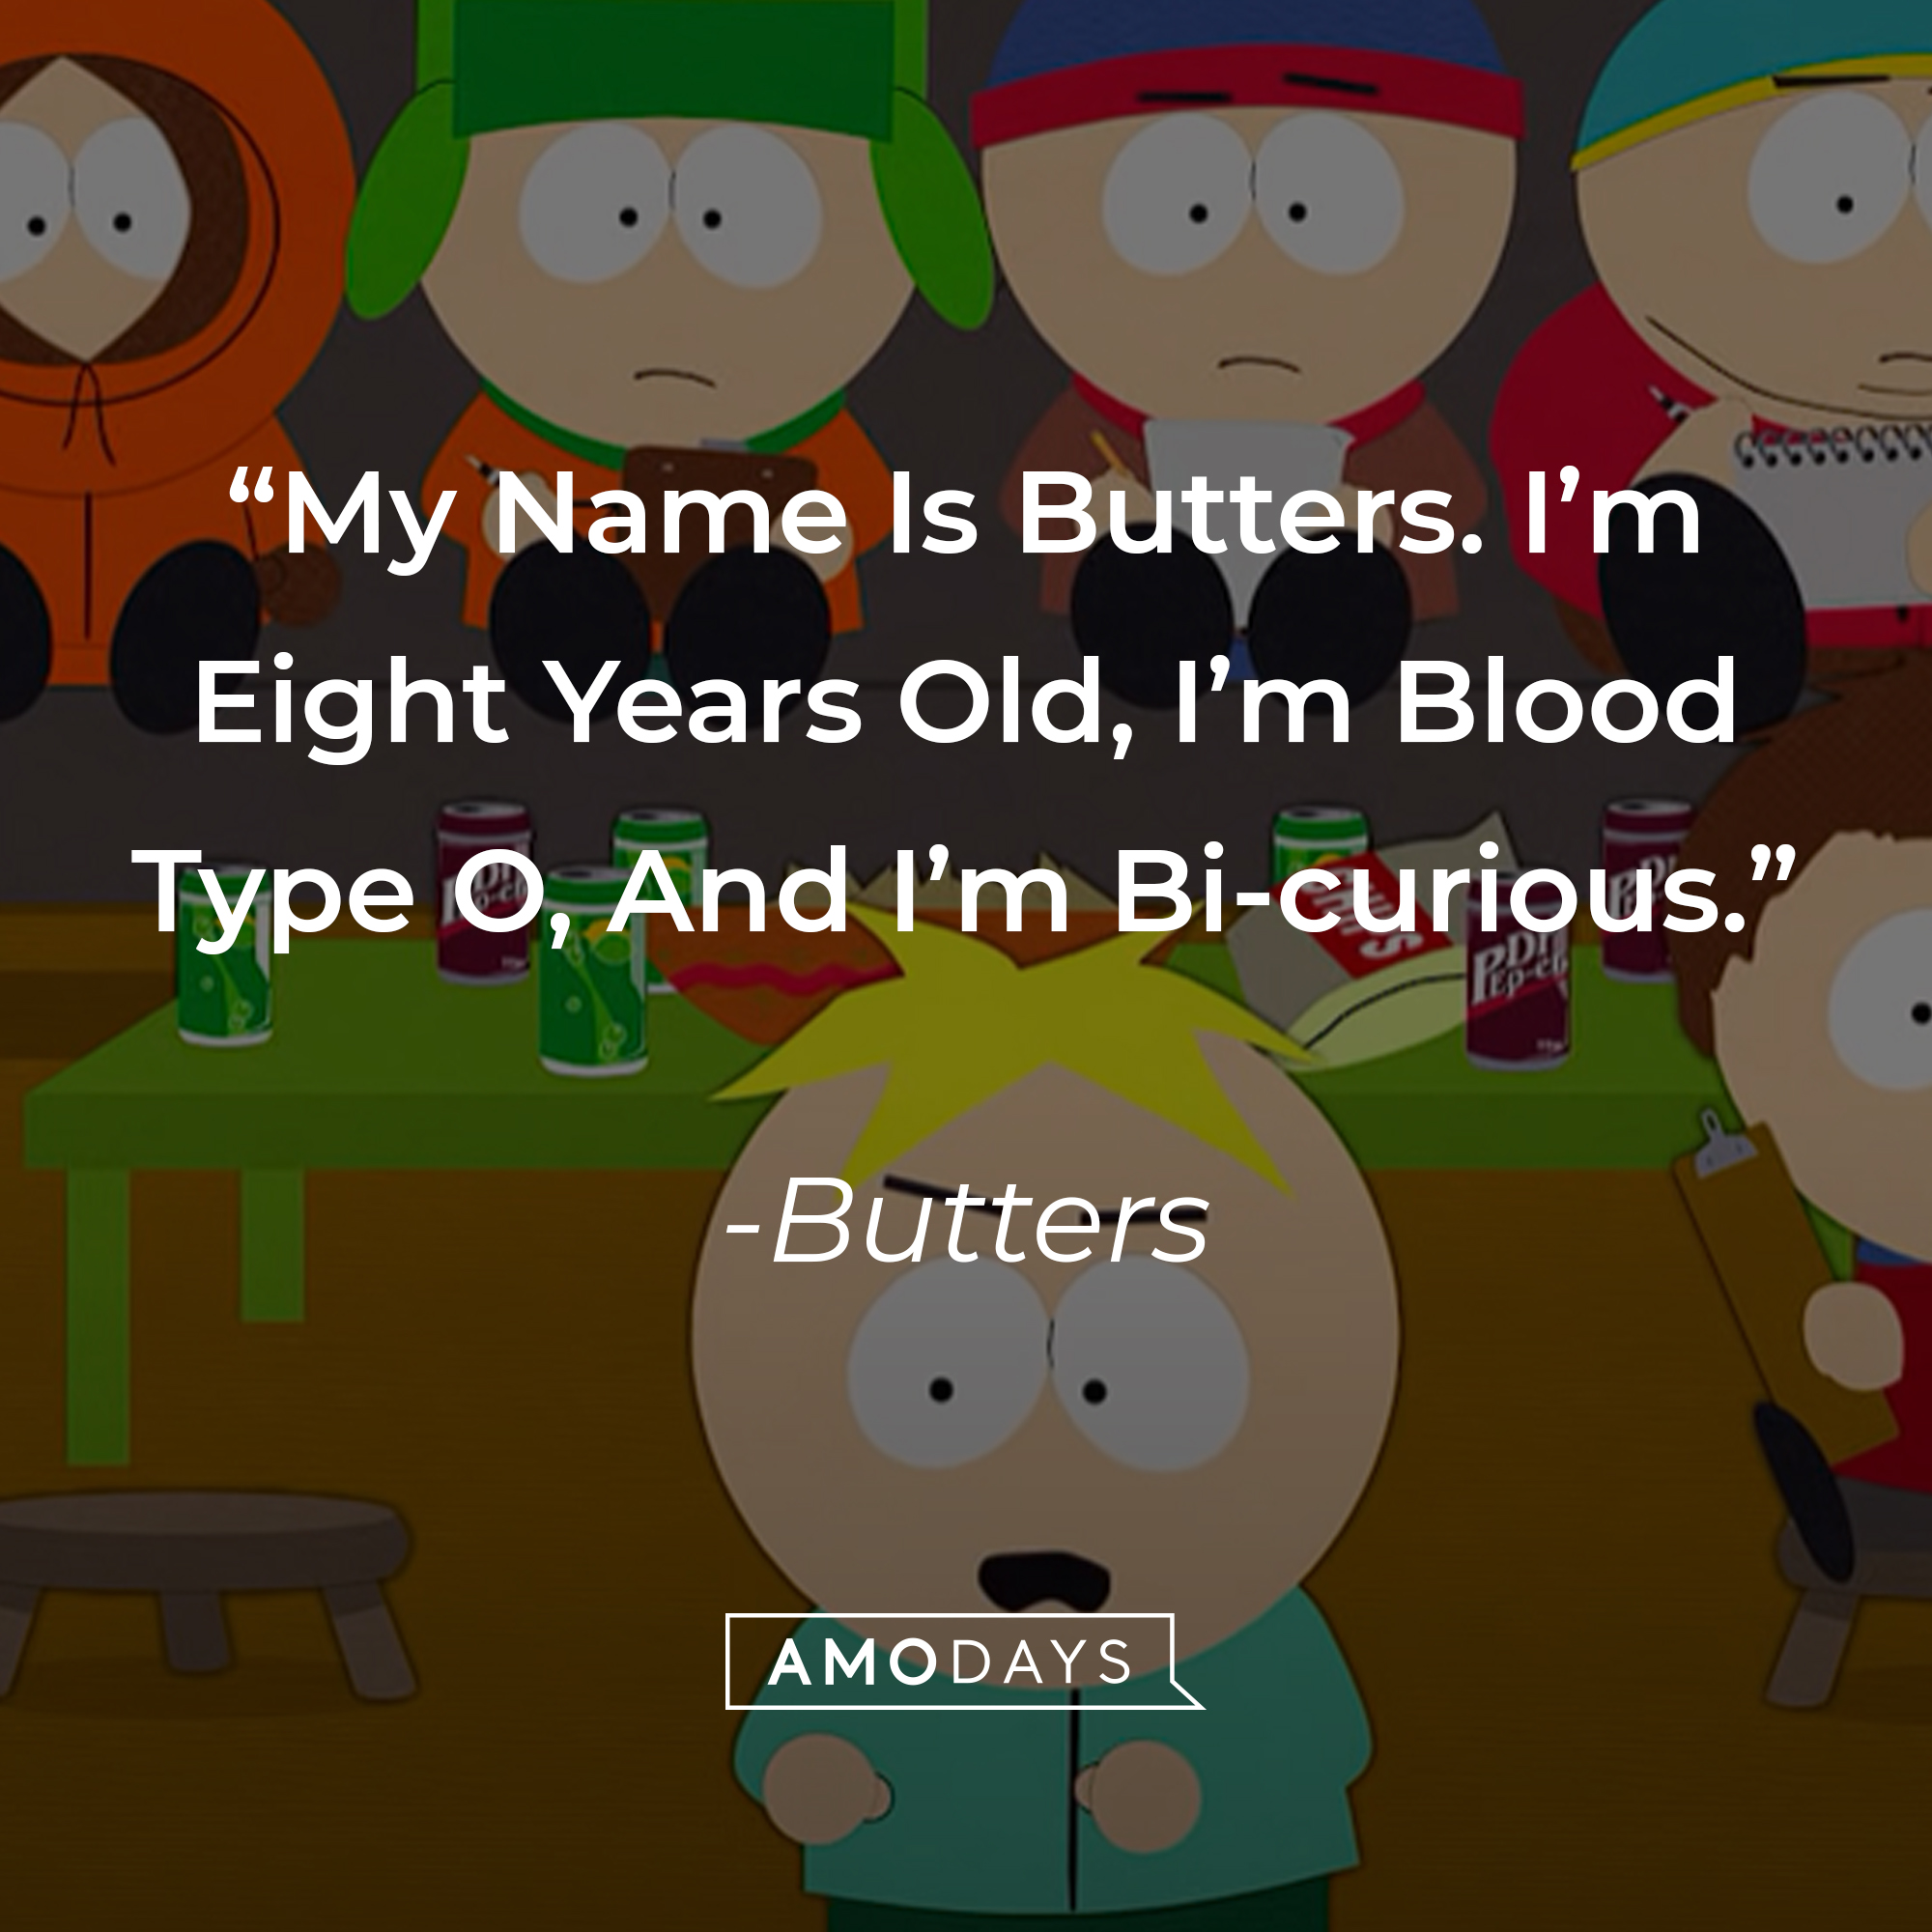 Butters' quote: "My Name Is Butters, I'm Eight Years Old, I'm Blood Type O, And Bi-curious." | Source: youtube.com/southpark